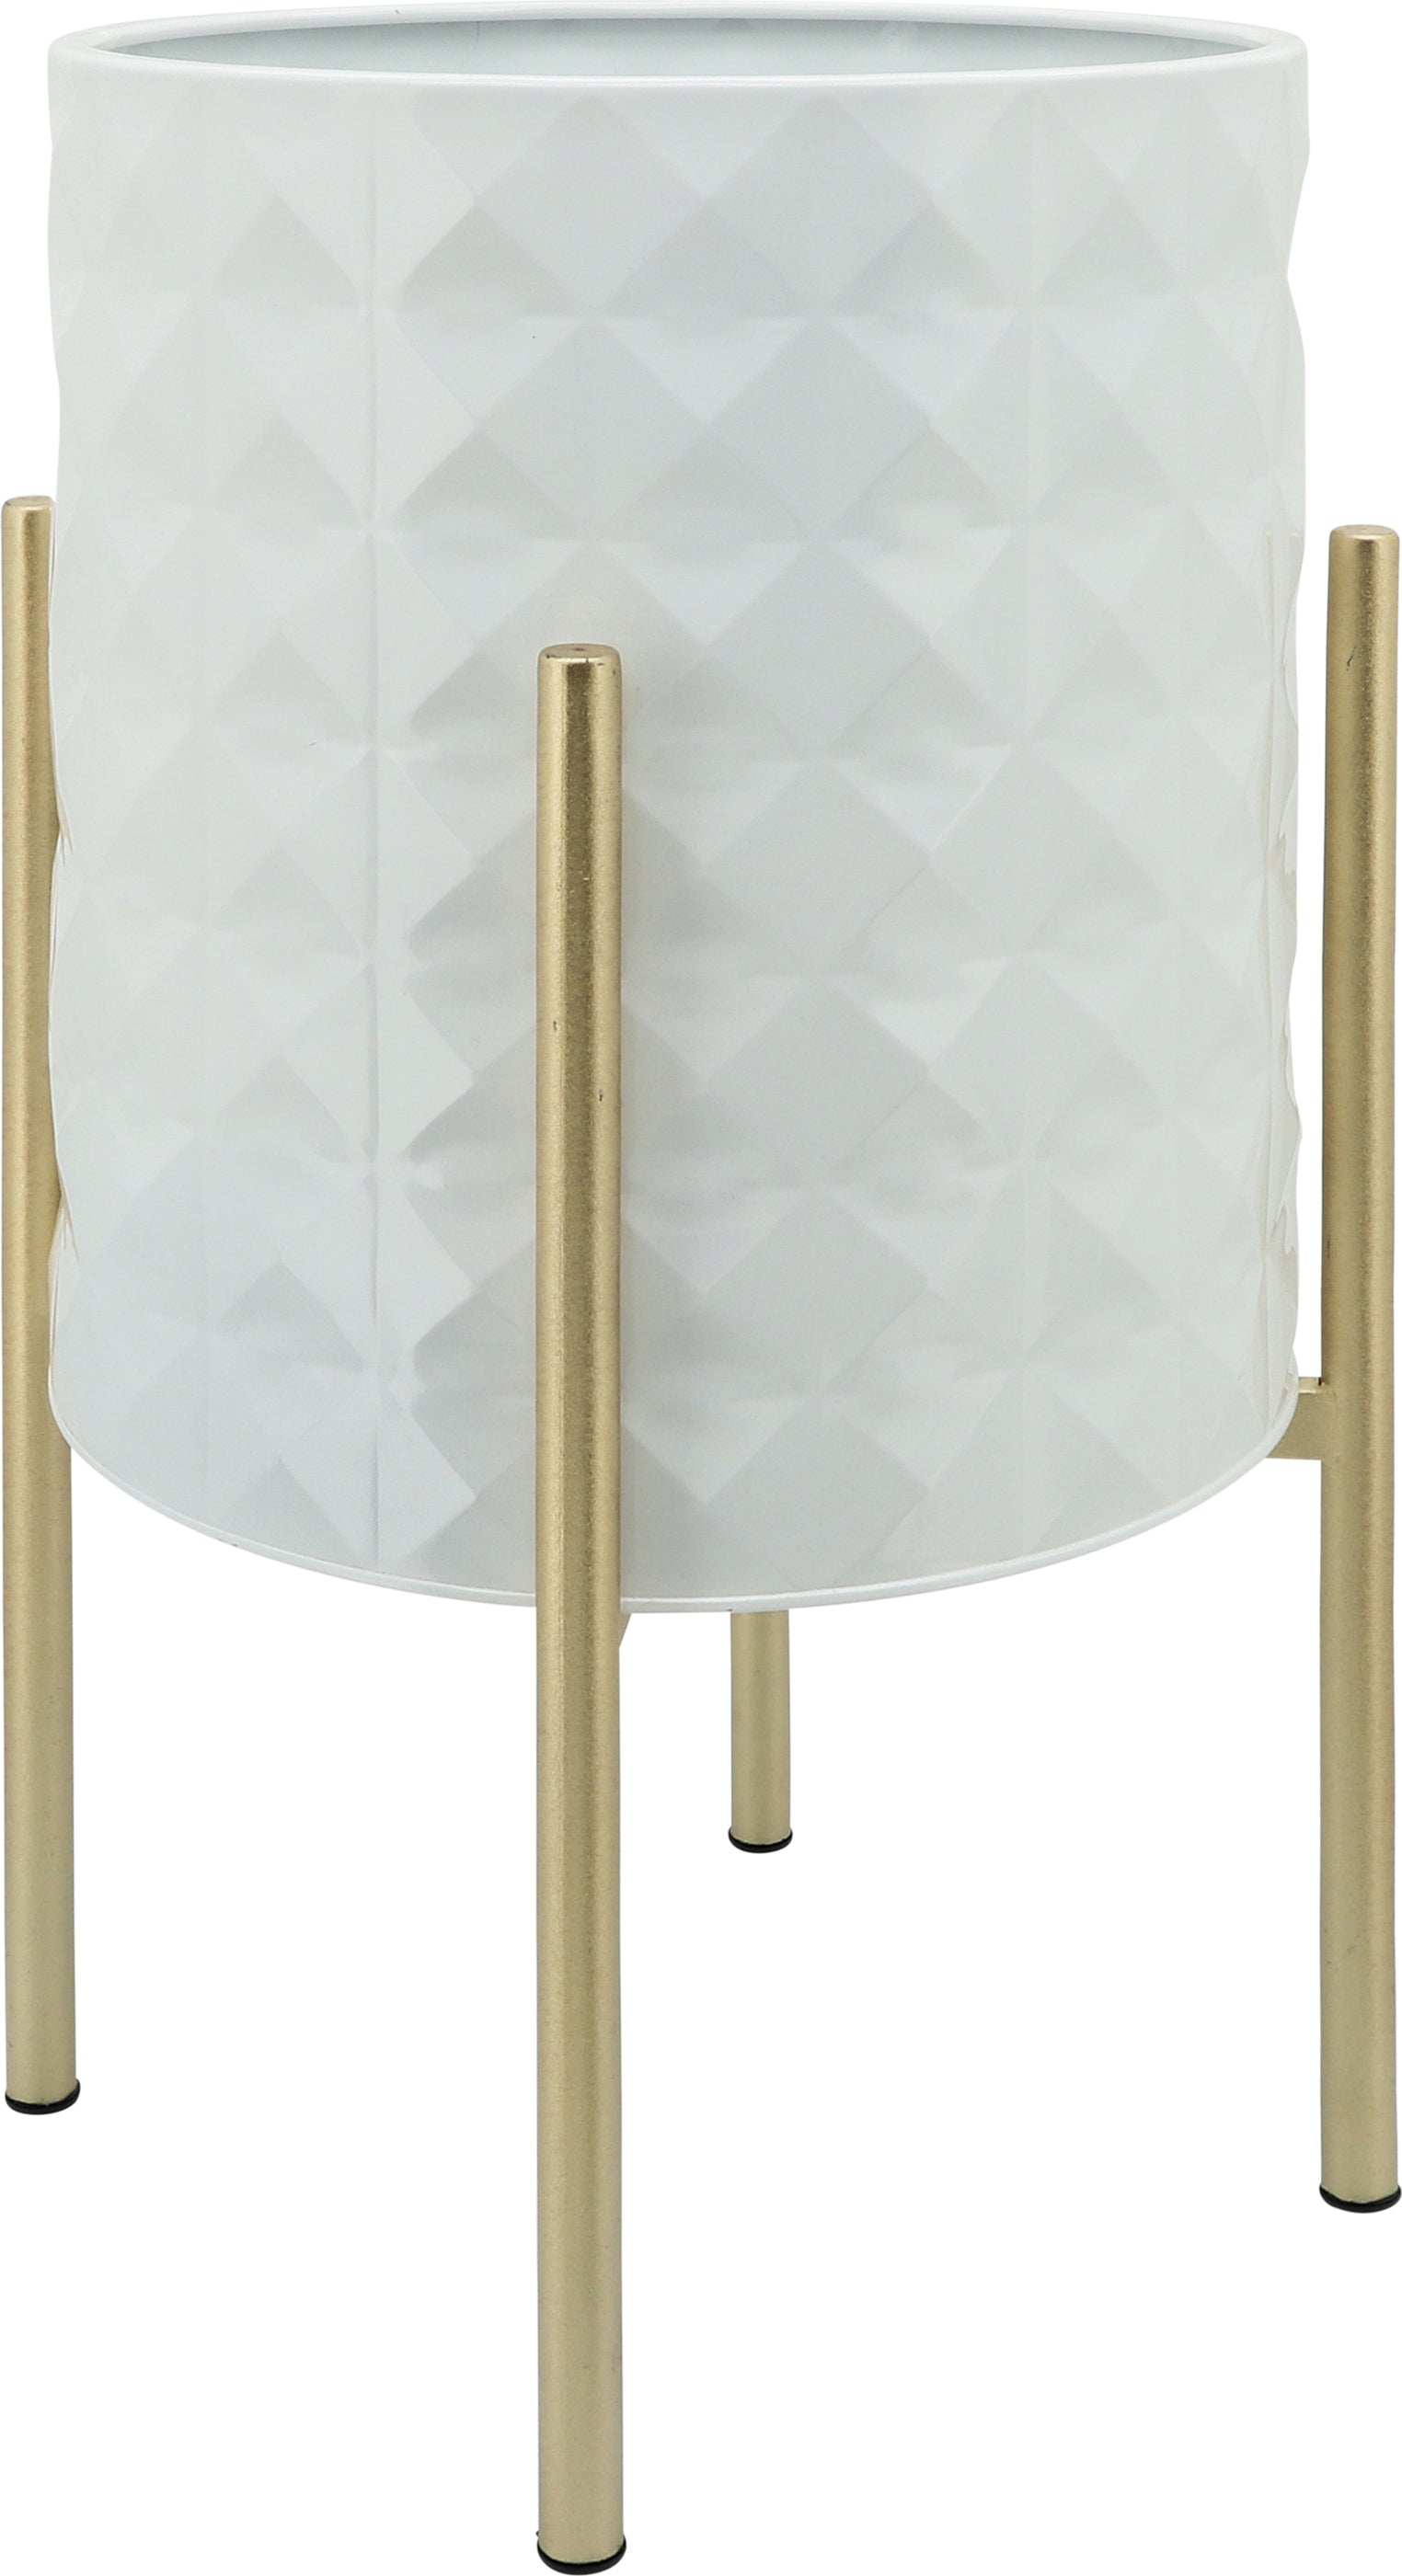 S/2 DIAMOND PLANTERS 6 IN METAL STAND, WHITE / -30%